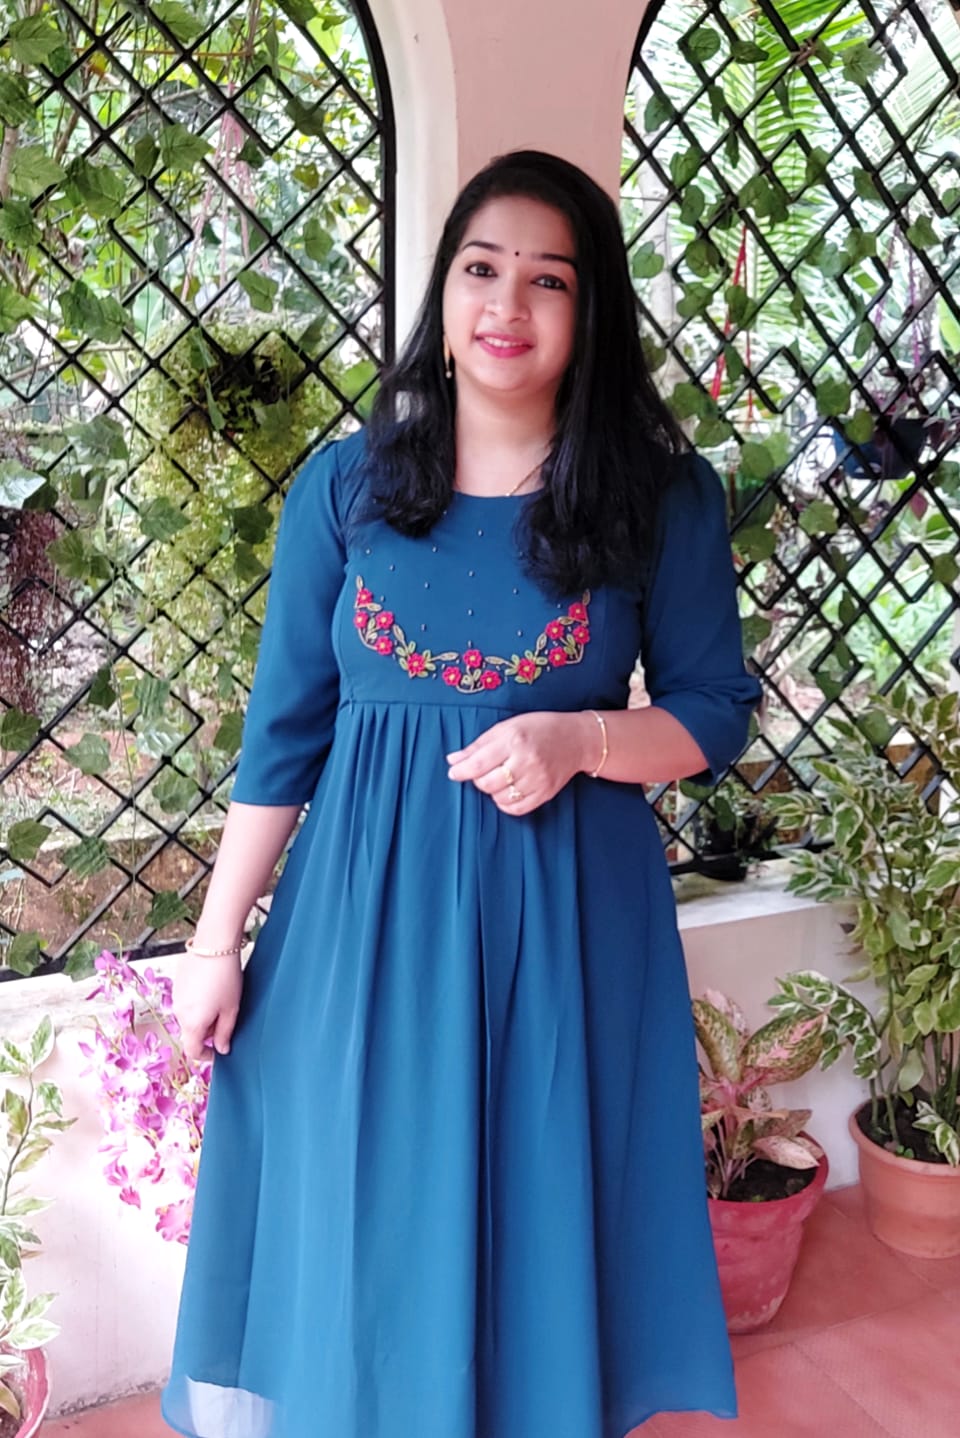 Buy True Shape Maternity Feeding Kurti for Women | Cotton Blend Anarkali  Dress with Nursing Zip for Pre & Post Pregnancy (TSF-171-S,Turquoise Blue)  at Amazon.in